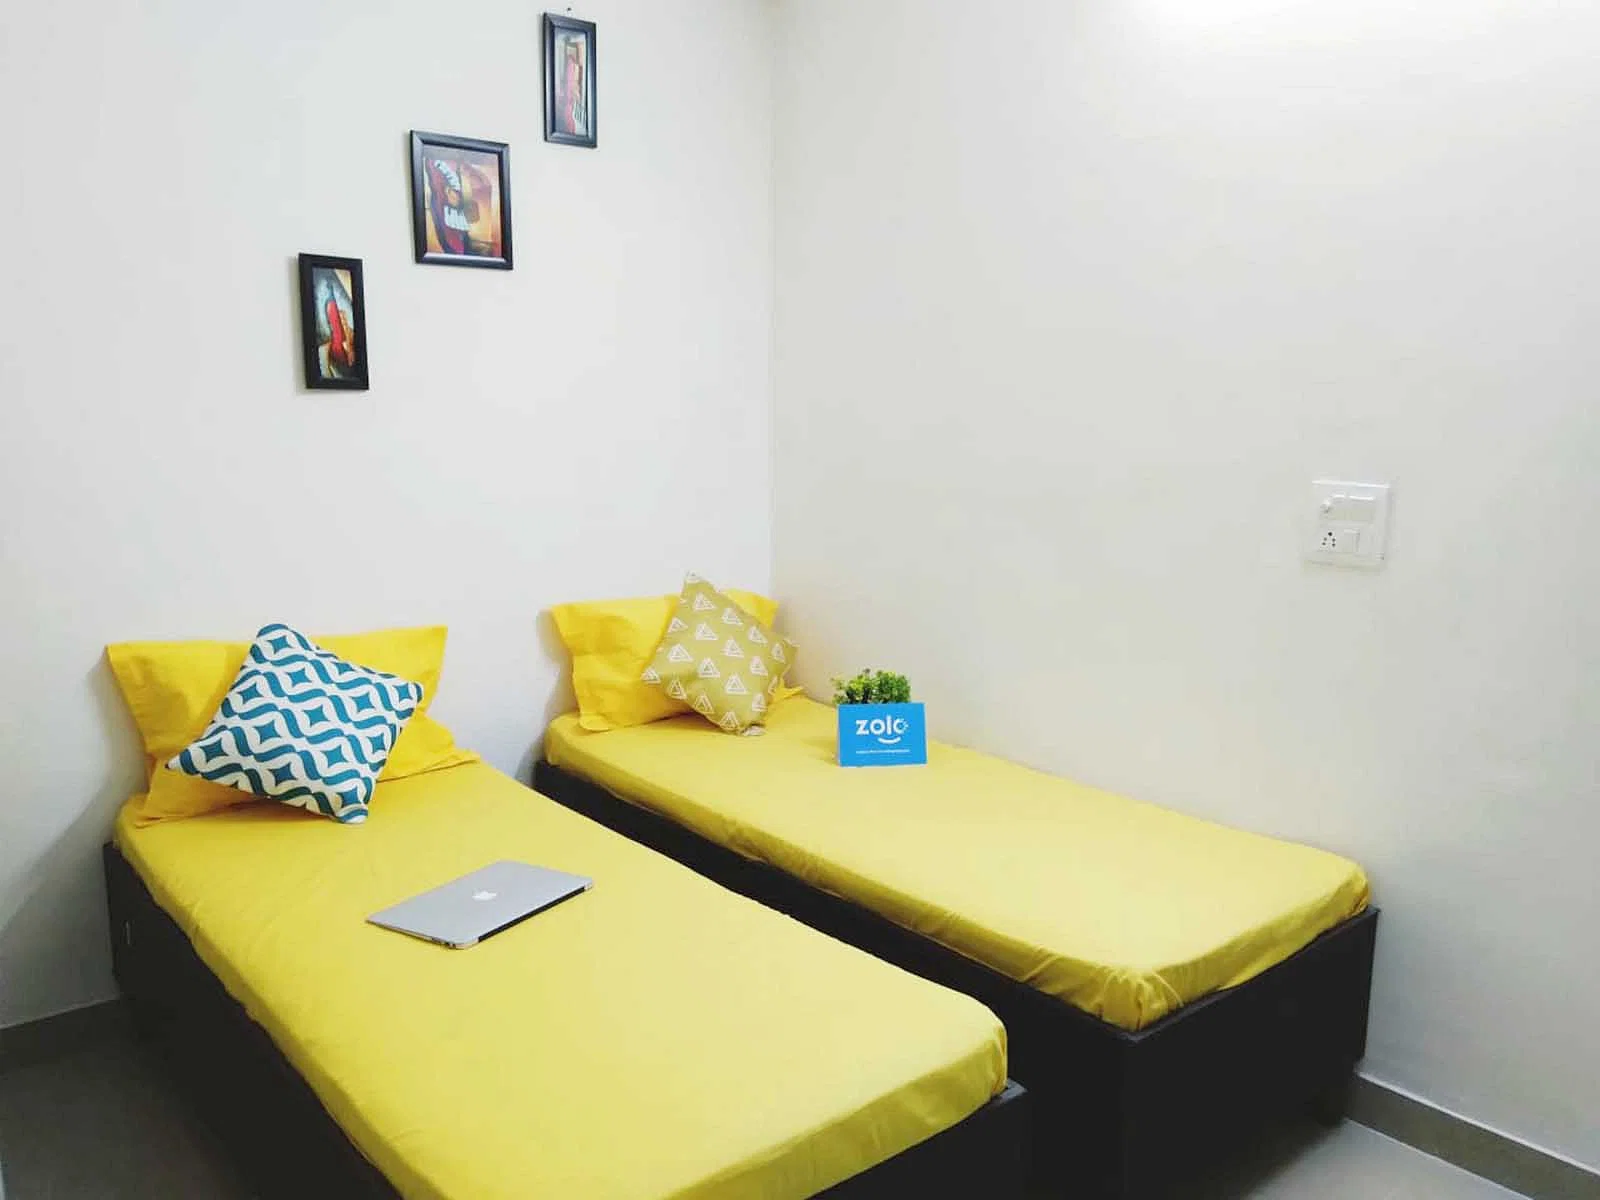 budget-friendly PGs and hostels for boys with single rooms with daily hopusekeeping-Zolo Youth